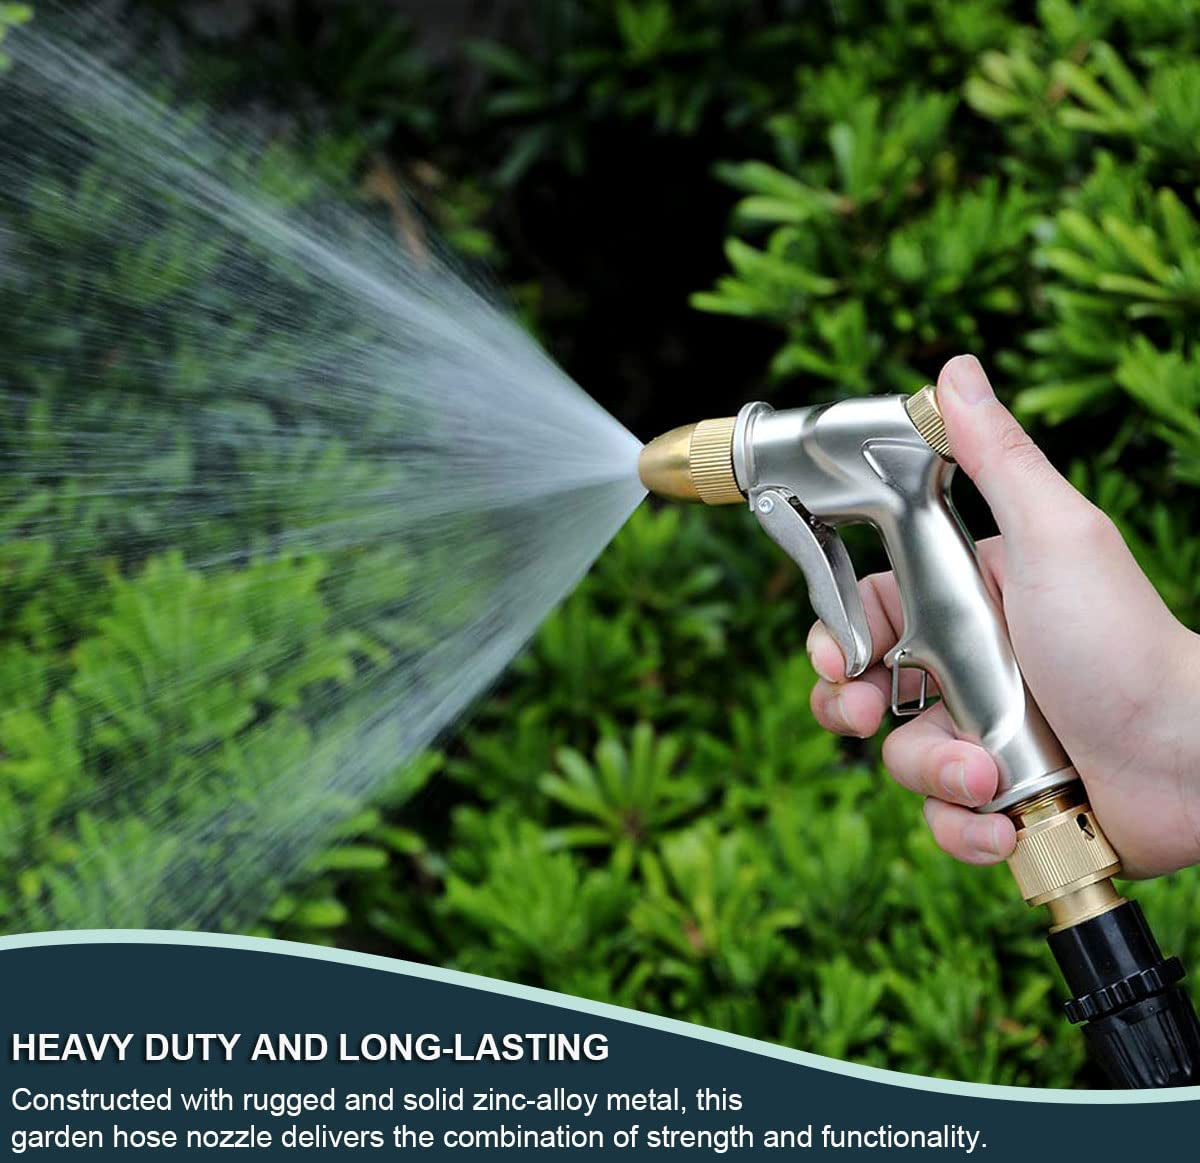 ESOW, ESOW Garden Hose Nozzle, 100% Heavy Duty Metal Spray Gun with Full Brass Nozzle, 4 Watering Patterns Watering Nozzle- High Pressure Pistol Grip Sprayer for Watering Plants, Car Wash and Showering Dog